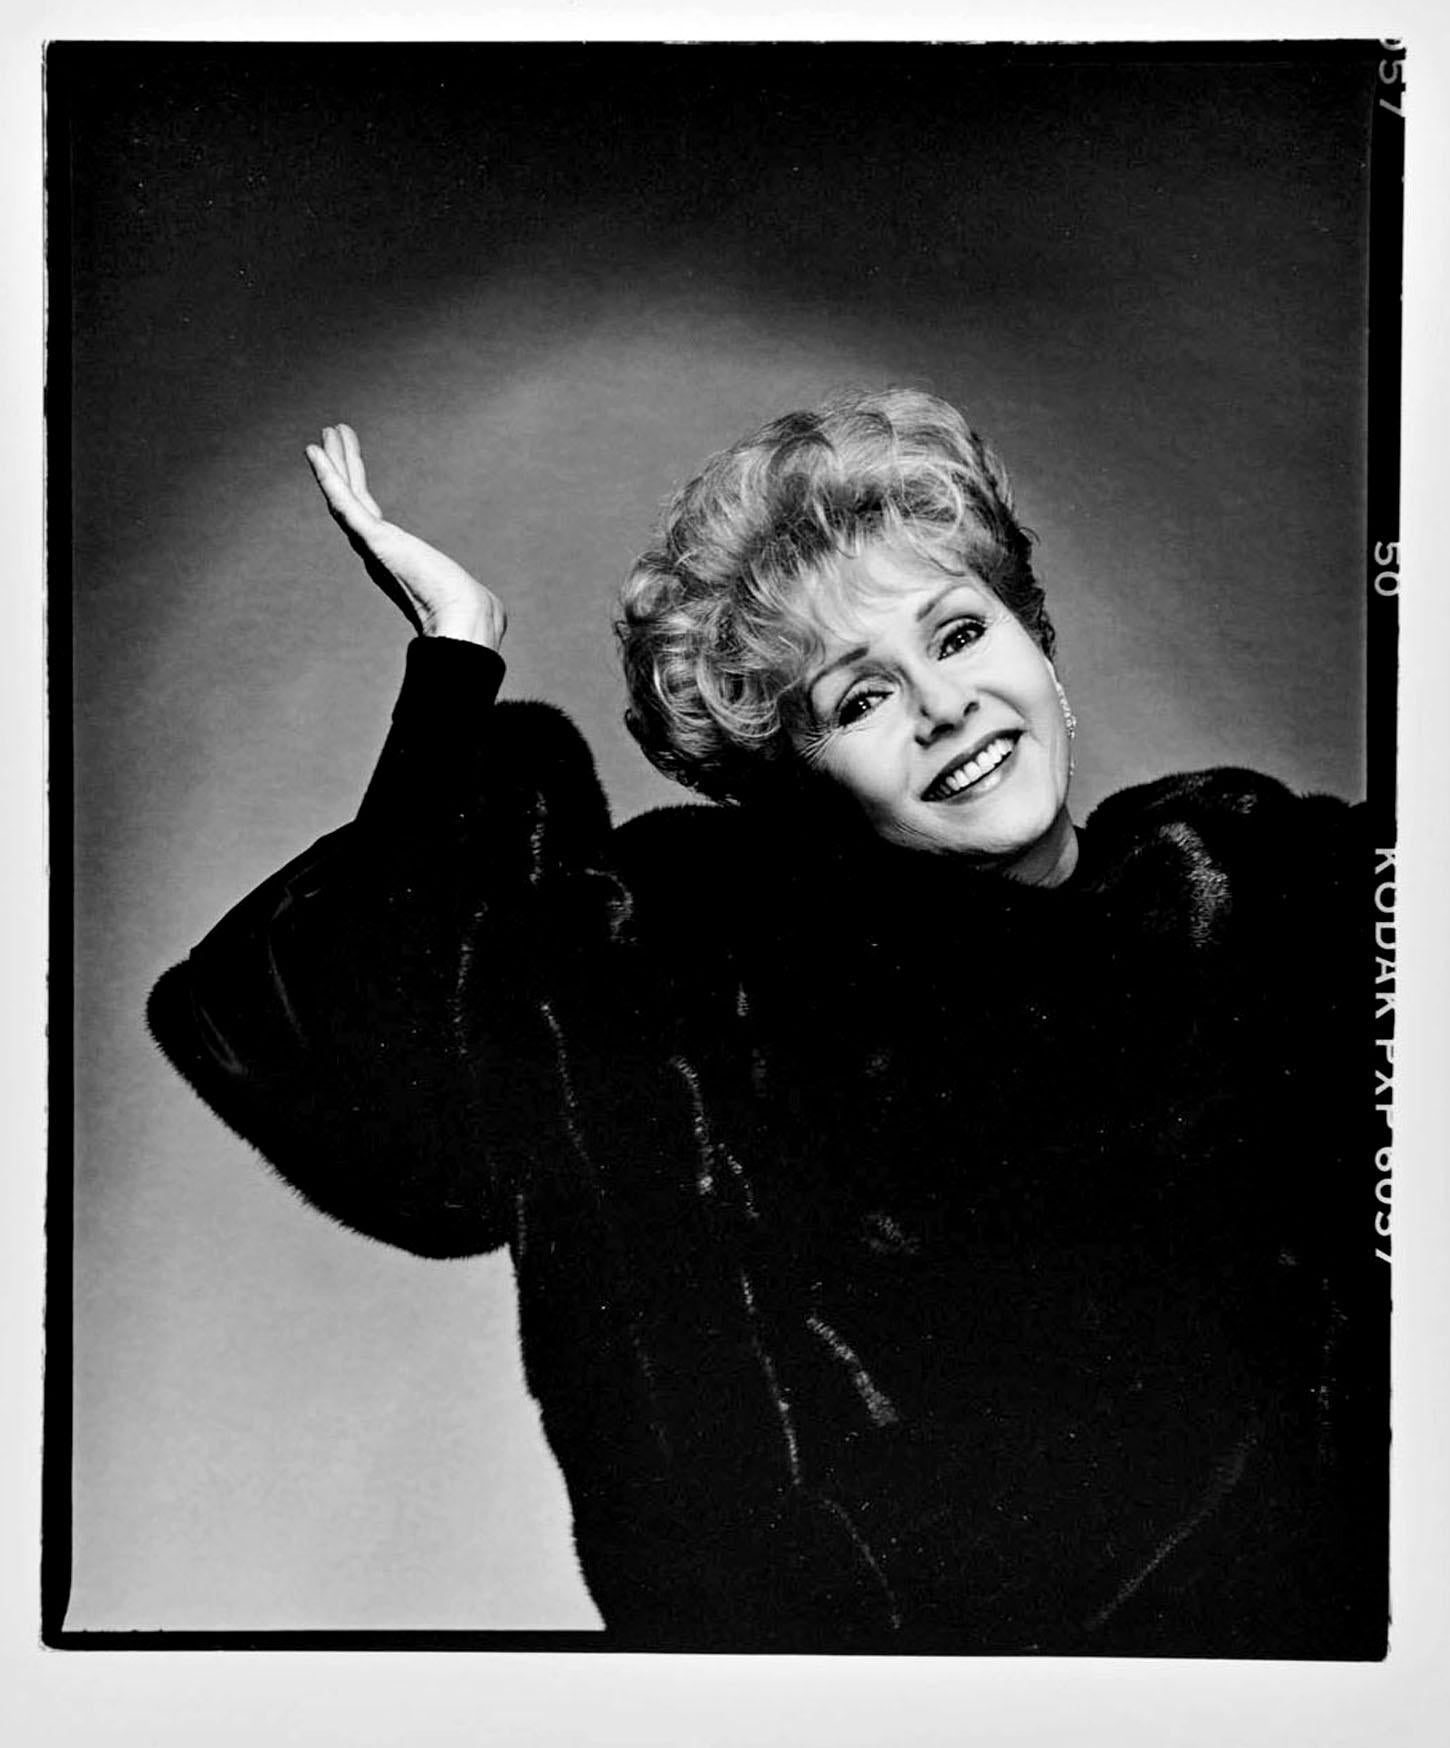 Actress Debbie Reynolds 'What Becomes a Legend Most?' Blackglama Session Photo